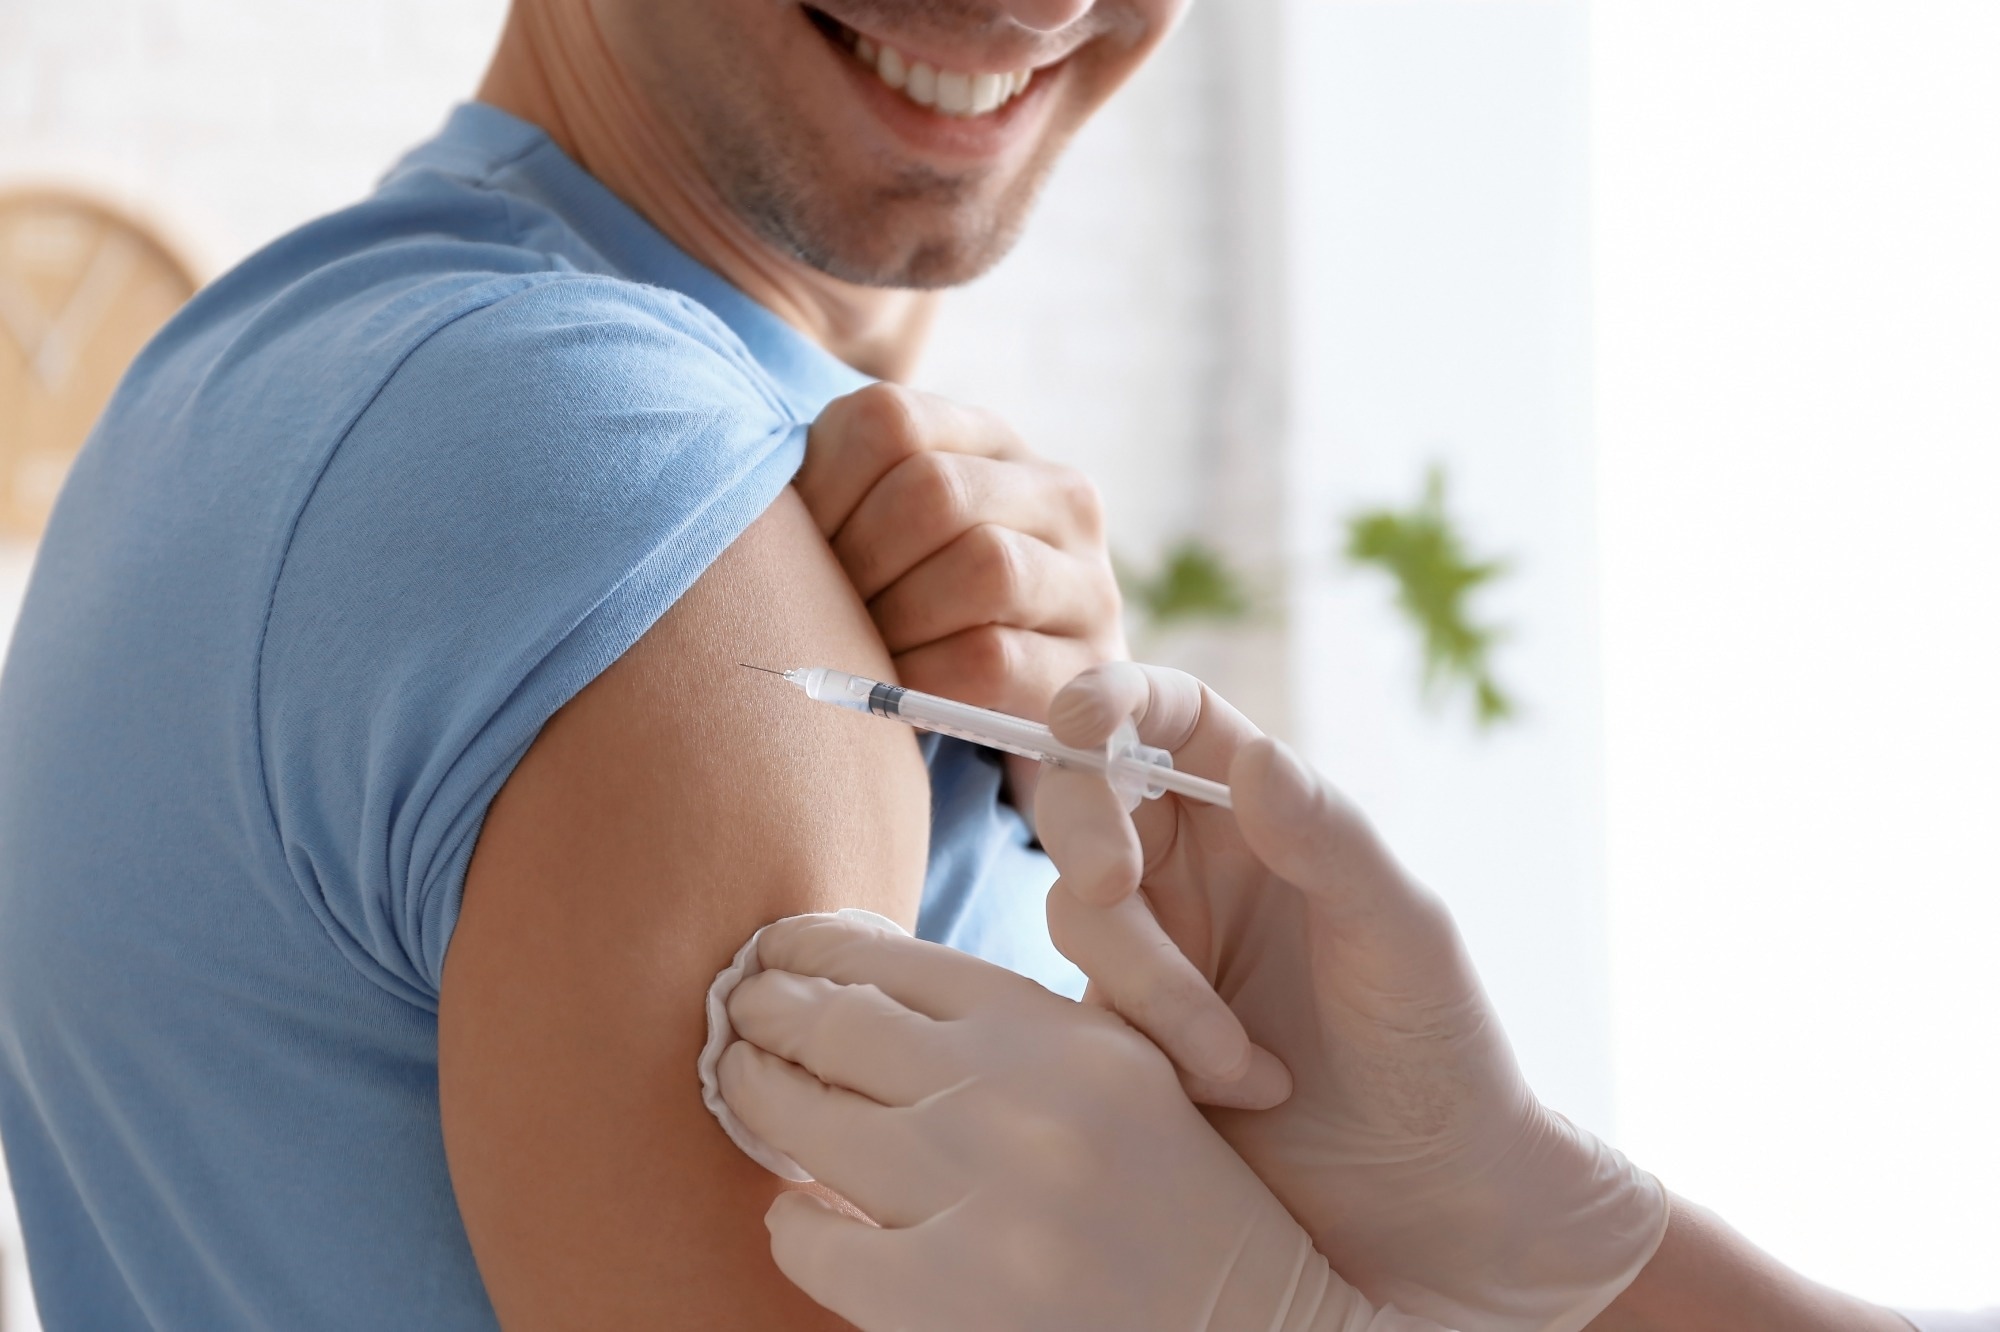 Study: Estimated Effectiveness of Coadministration of the BNT162b2 BA.4/5 COVID-19 Vaccine With Influenza Vaccine. Image Credit: New Africa / Shutterstock.com